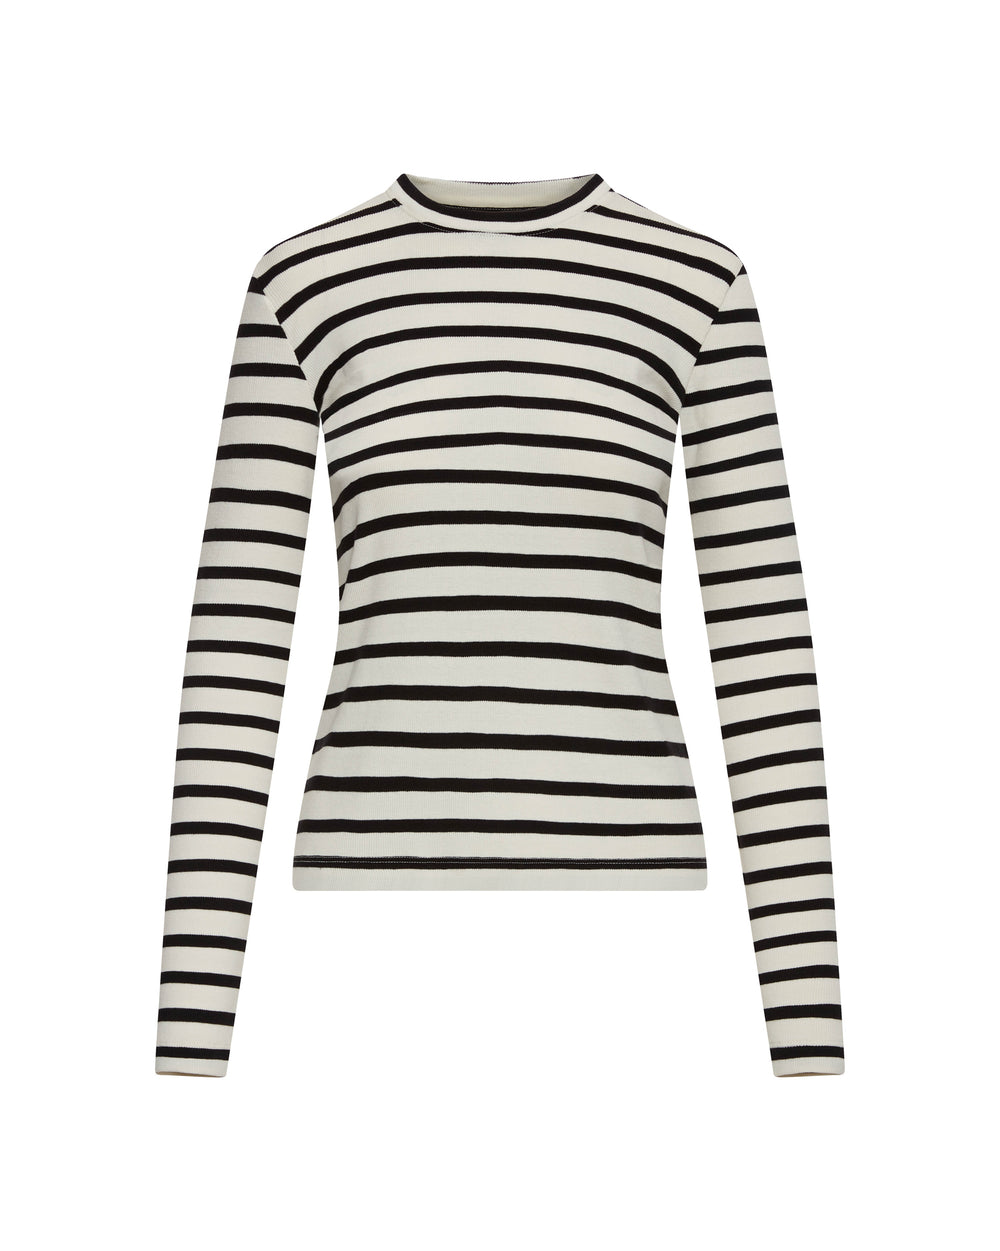 Striped Longsleeve Tee in Ribbed Cotton | Work Shirts for Women | Argent